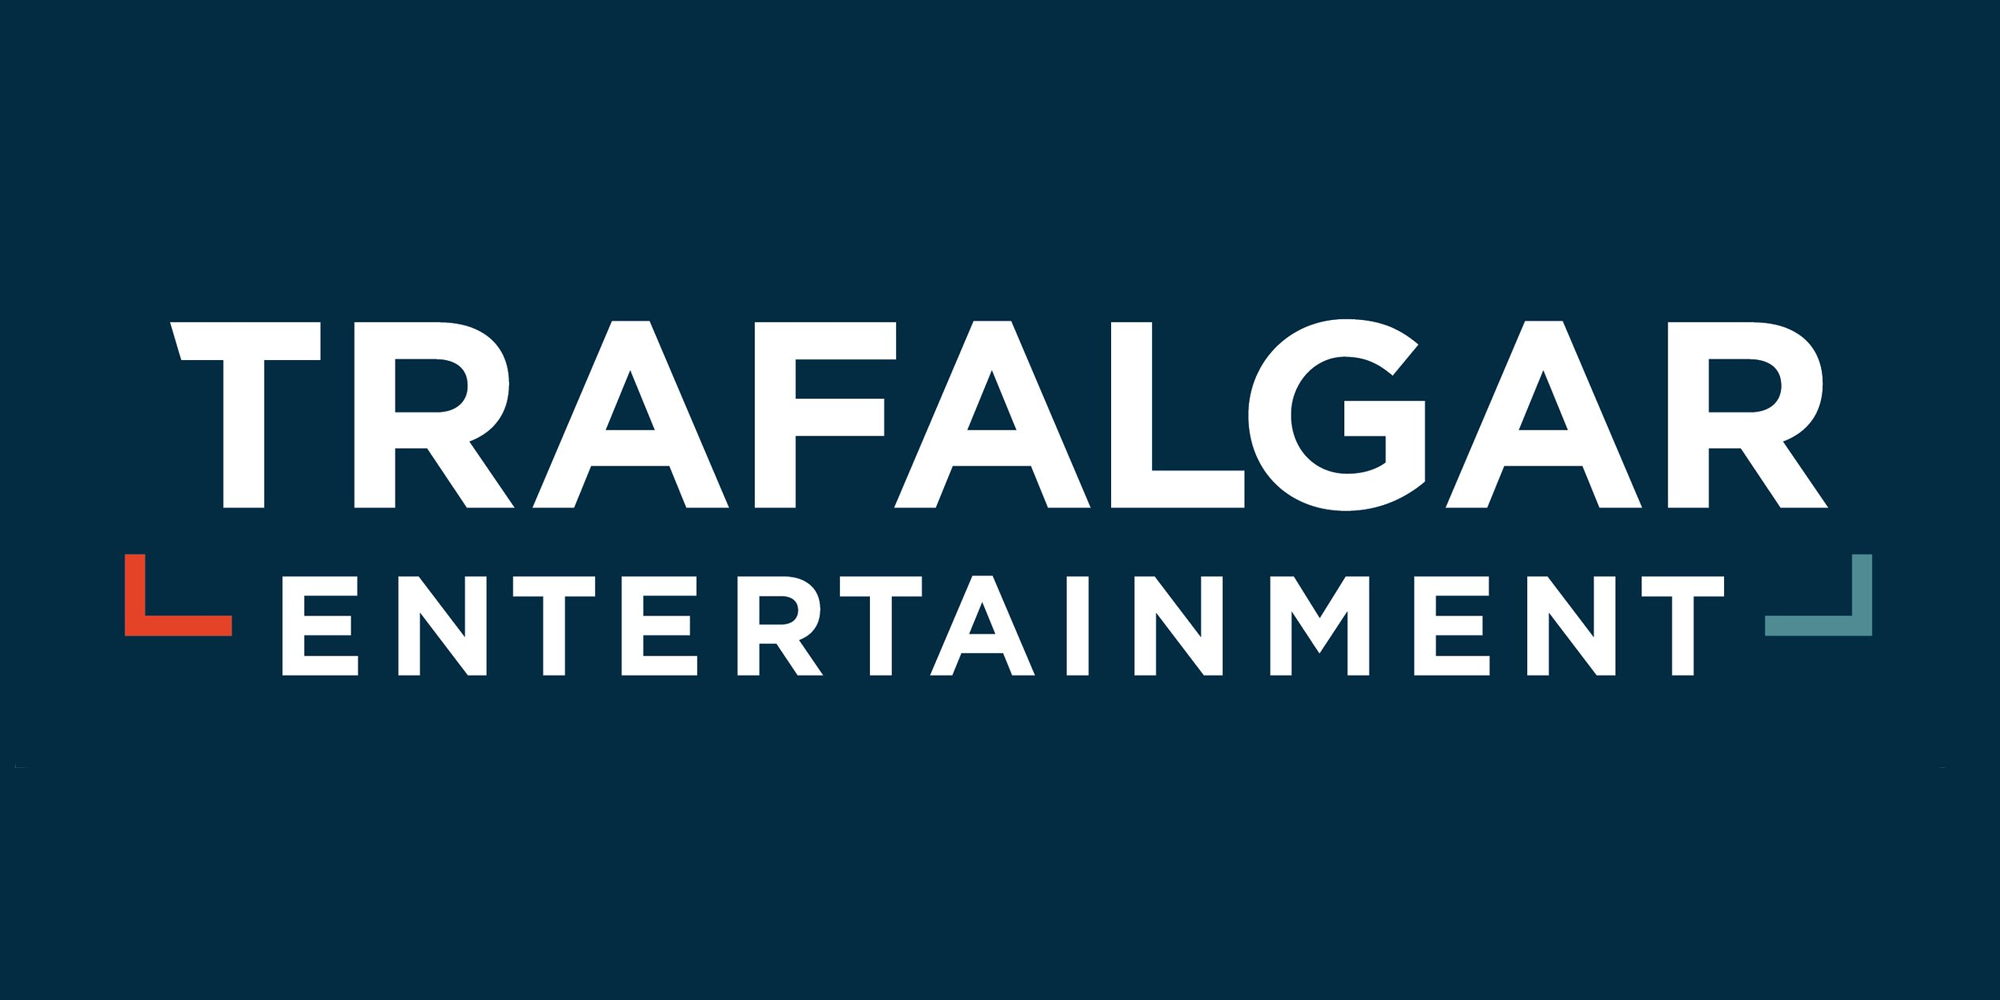 Trafalgar Entertainment announced as one of Europe’s Fastest Growing Companies